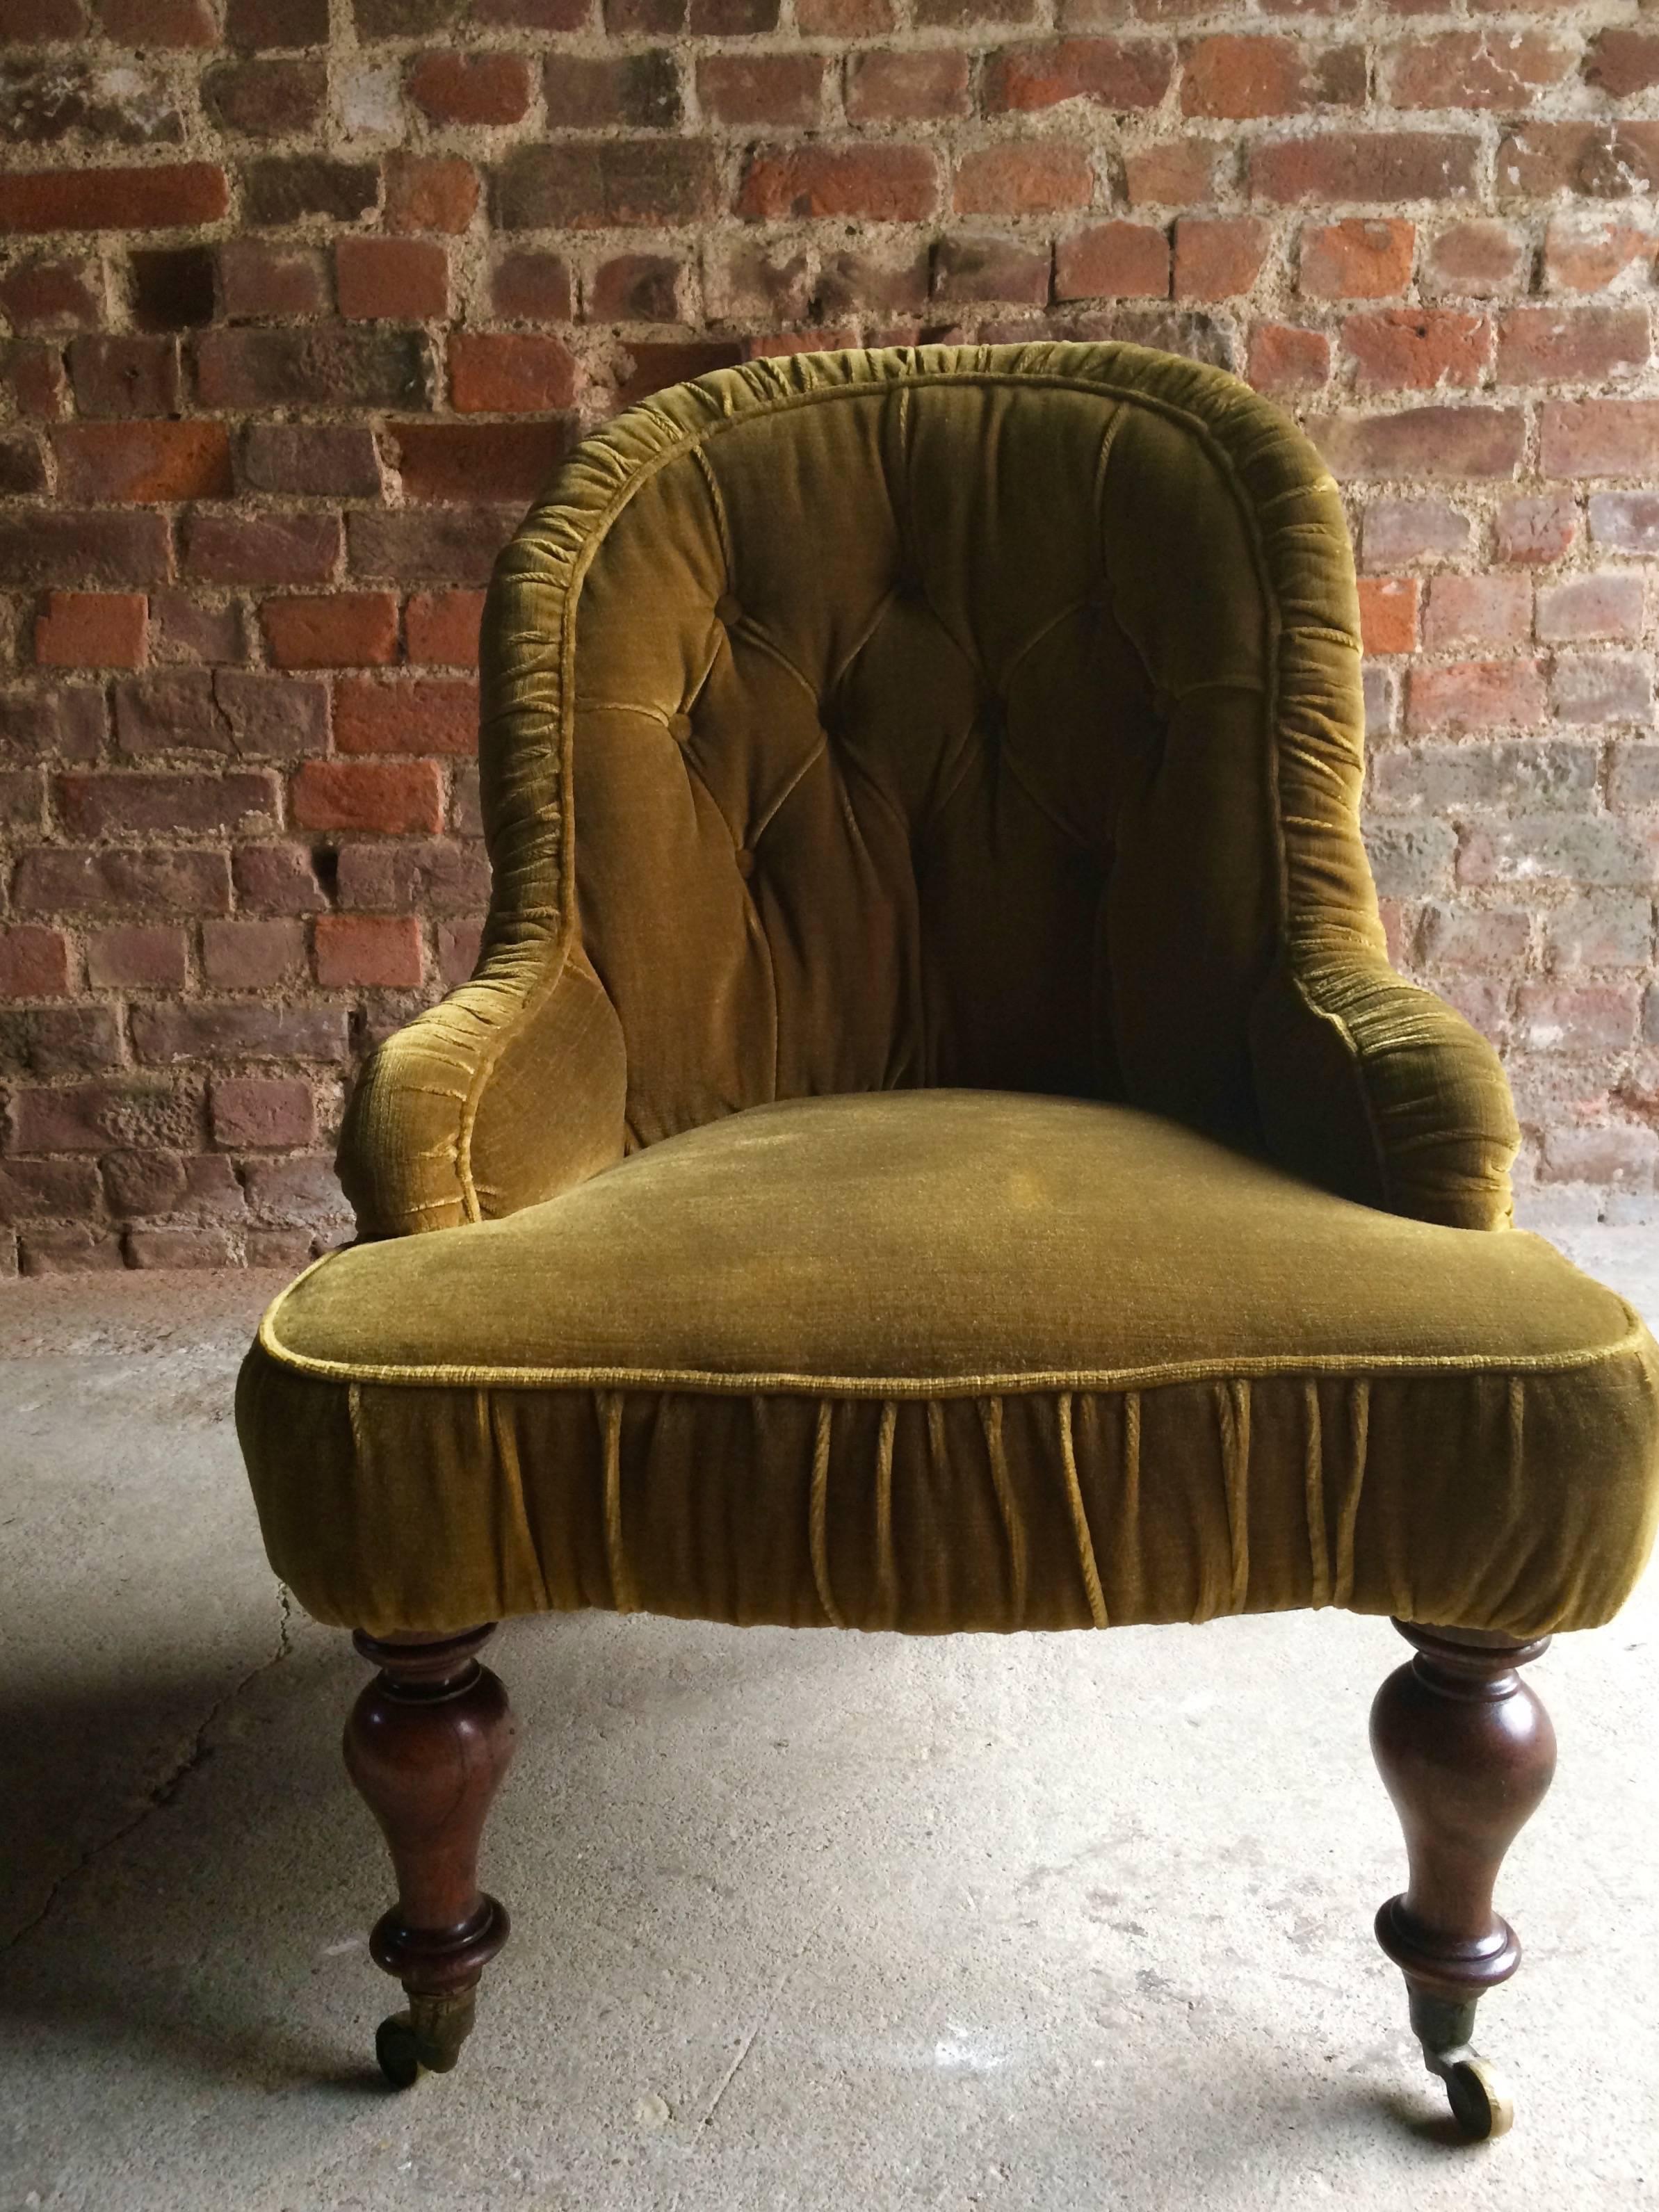 A magnificent antique late Victorian 19th century green fabric button back nursing chair, the chair raised on four rosewood legs with casters, extremely comfortable, there are no tears or rips to the fabric and the joints are all solid, looks